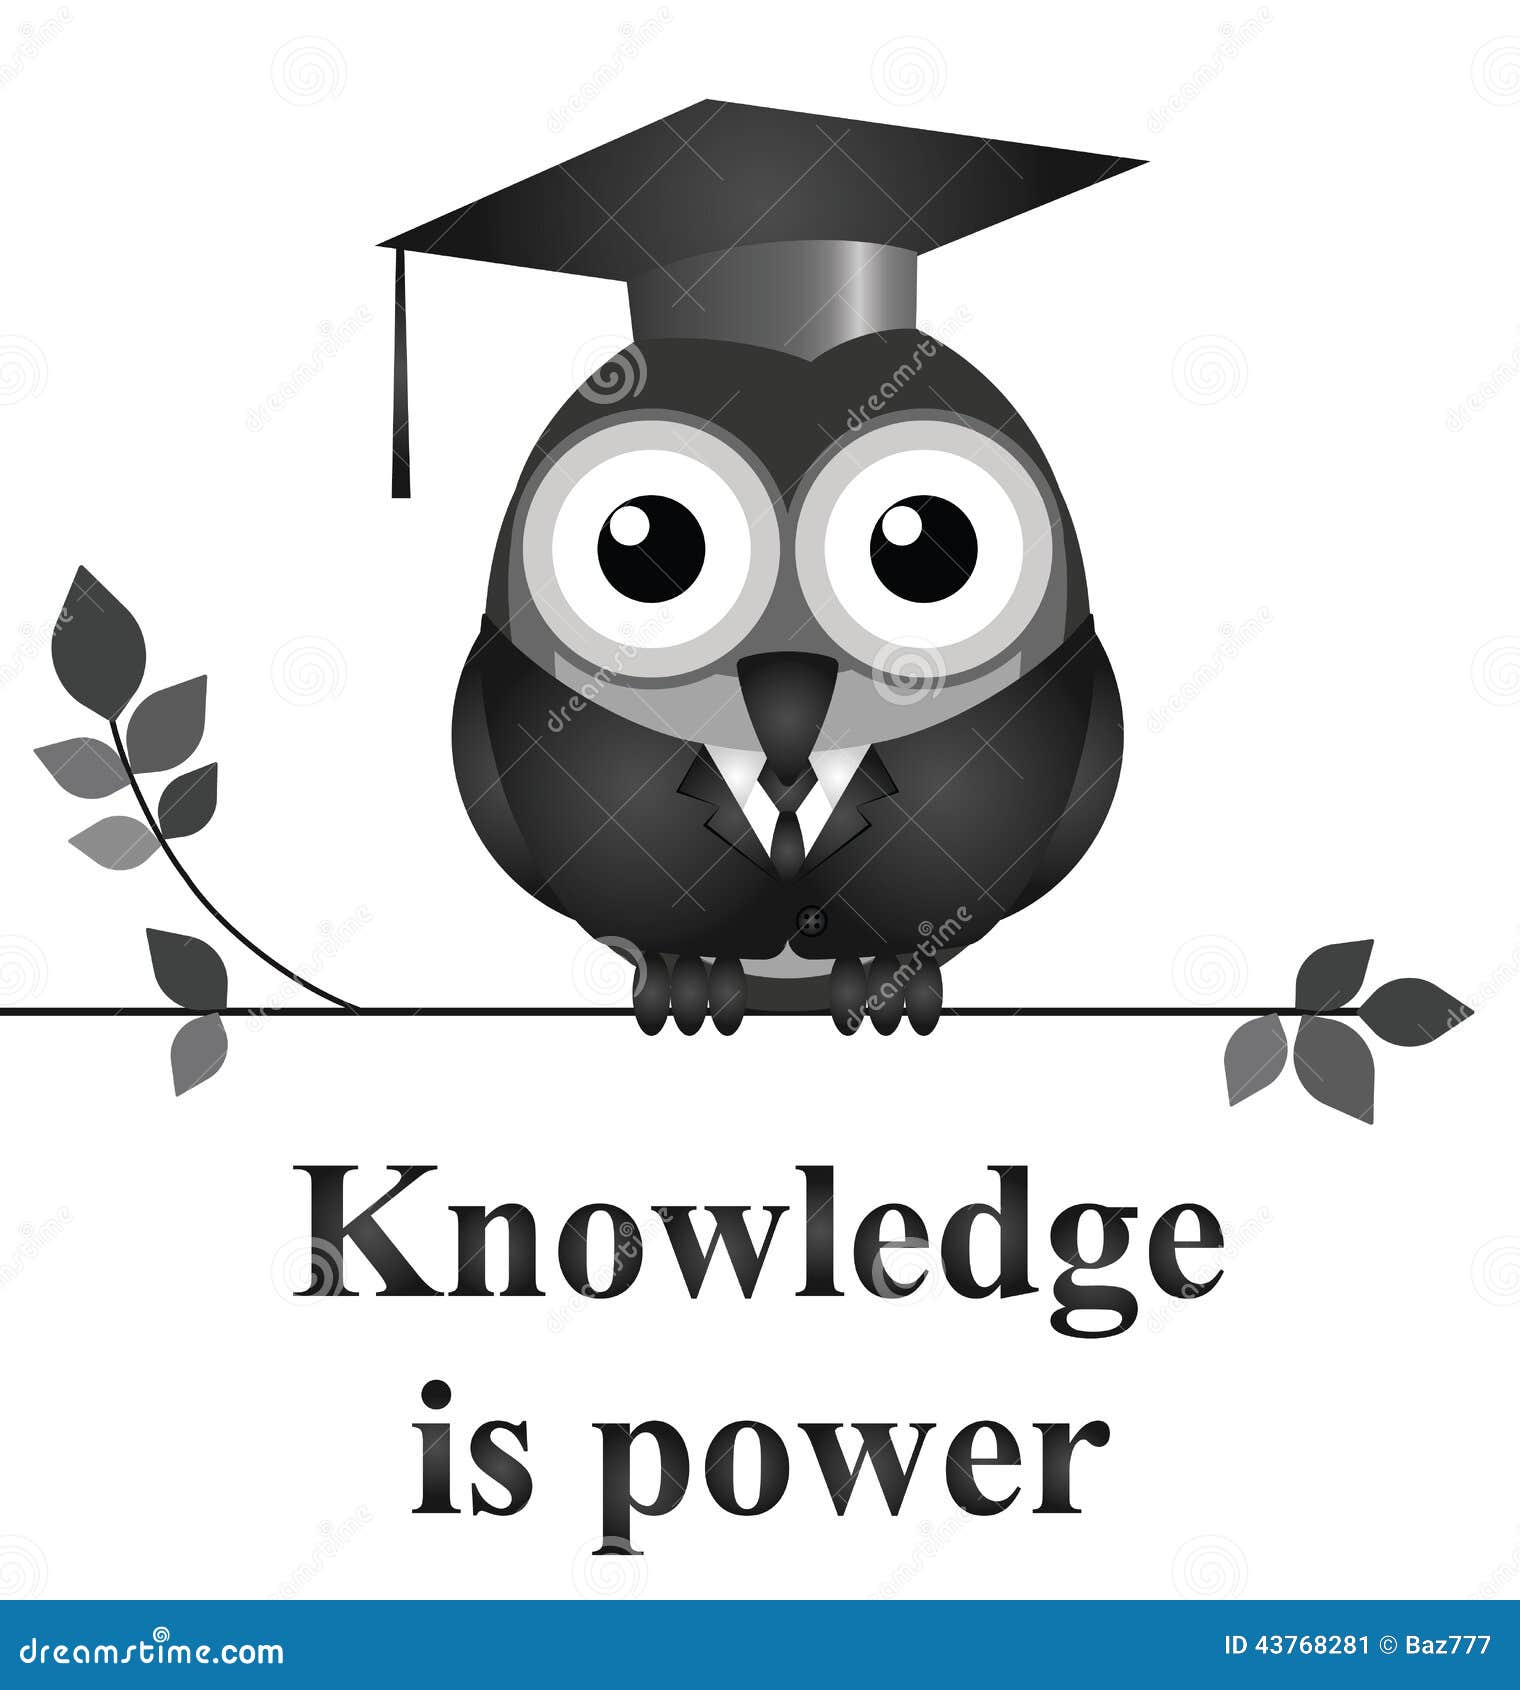 clipart on knowledge - photo #40